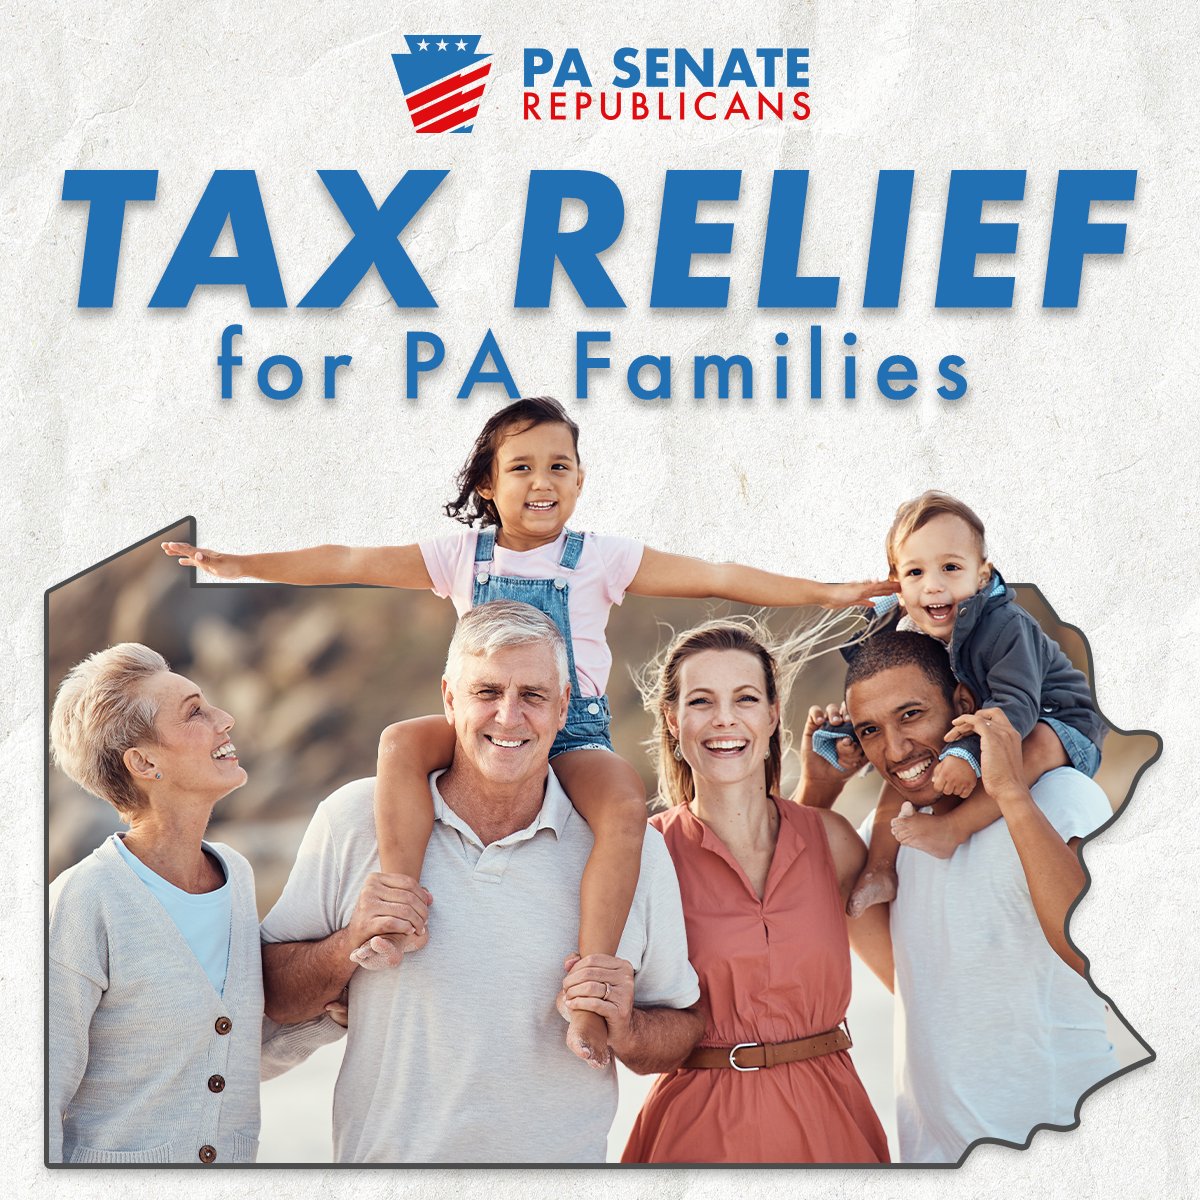 Household expenses are out of control & the minimum income families need to take home to break out of the cycle of living paycheck to paycheck keeps getting higher & higher. We passed the largest tax cut in PA history to give working class families relief: bit.ly/3JRRlMz